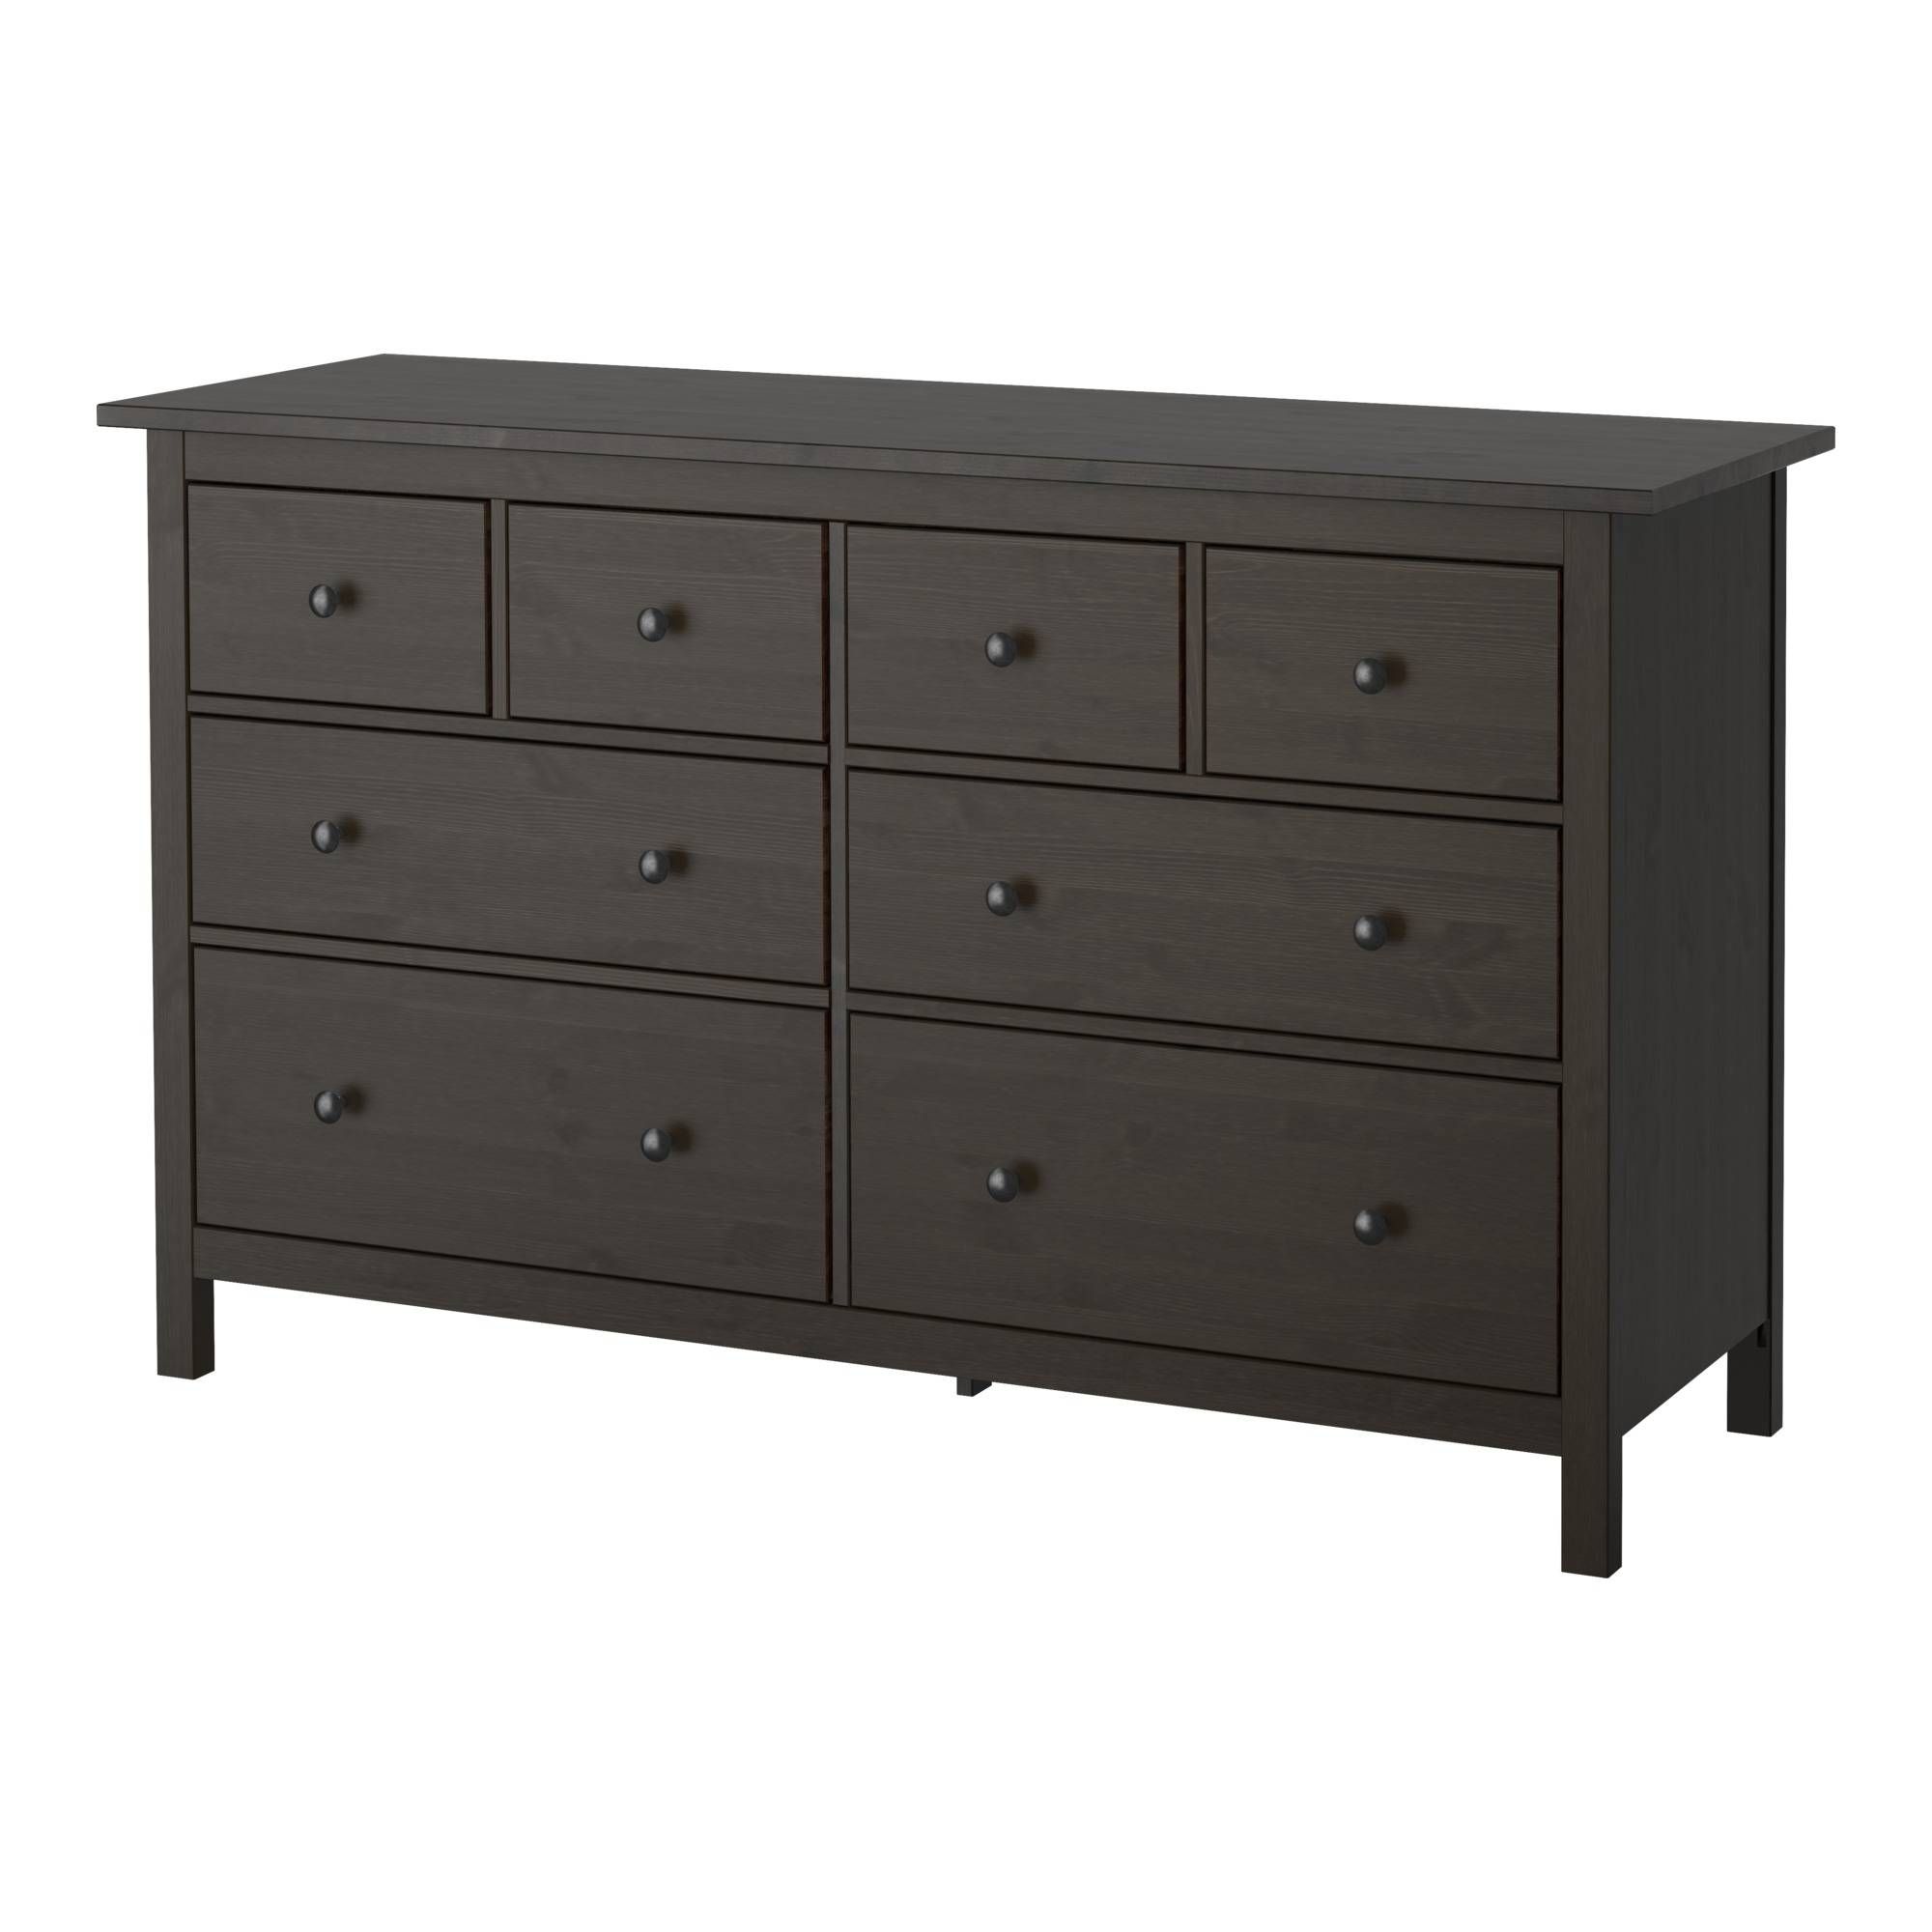 Hemnes 8 Drawer Dresser – Ikea For Dresser And Tv Stands Combination (View 14 of 15)